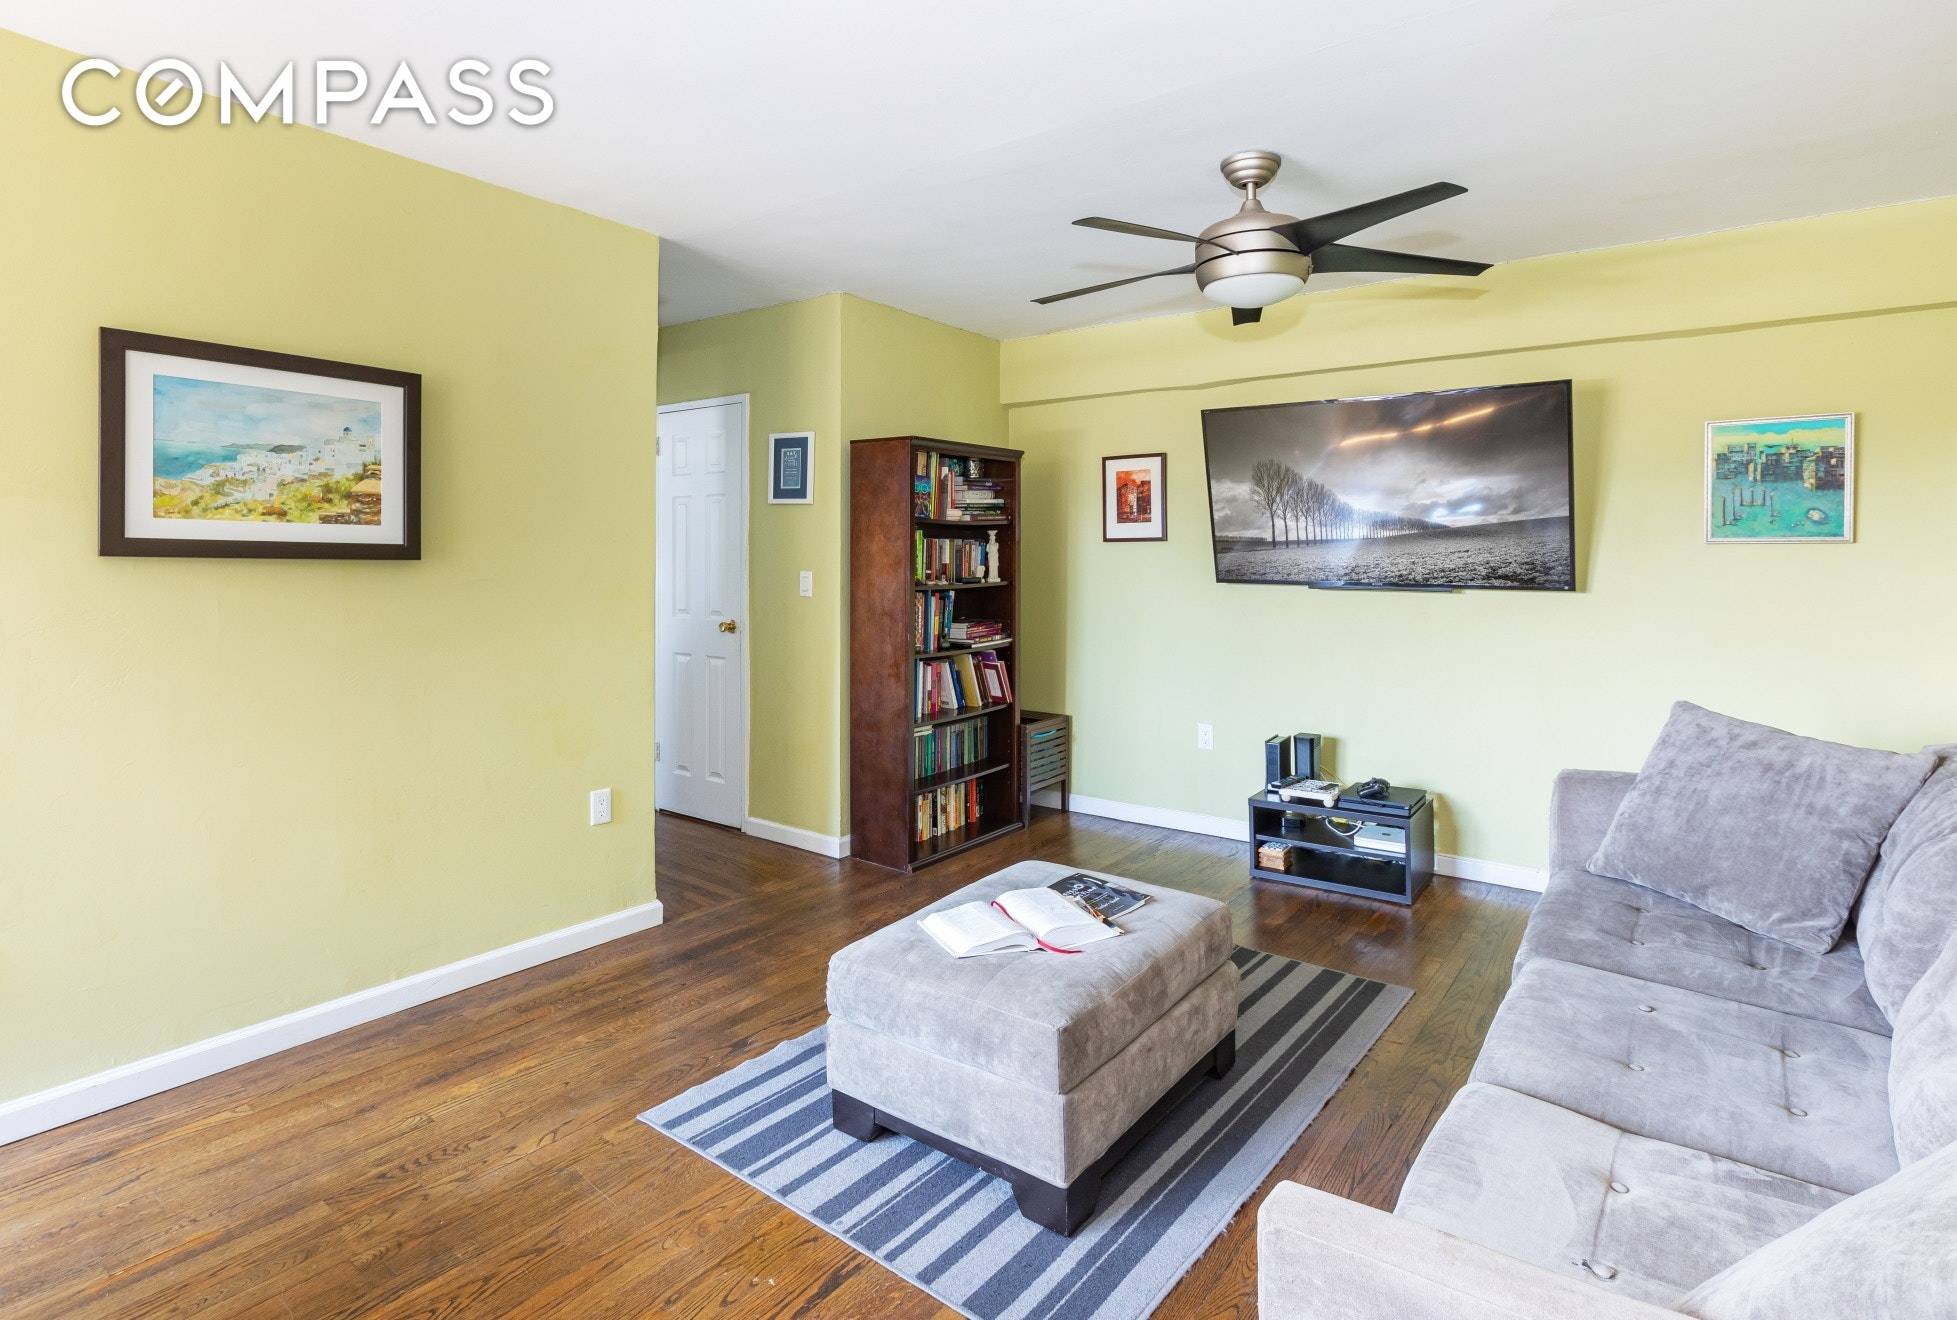 New to the market Move in ready a rare opportunity to purchase a renovated one bedroom condo in the lovely Asti Condominiums located in the heart of Astoria !